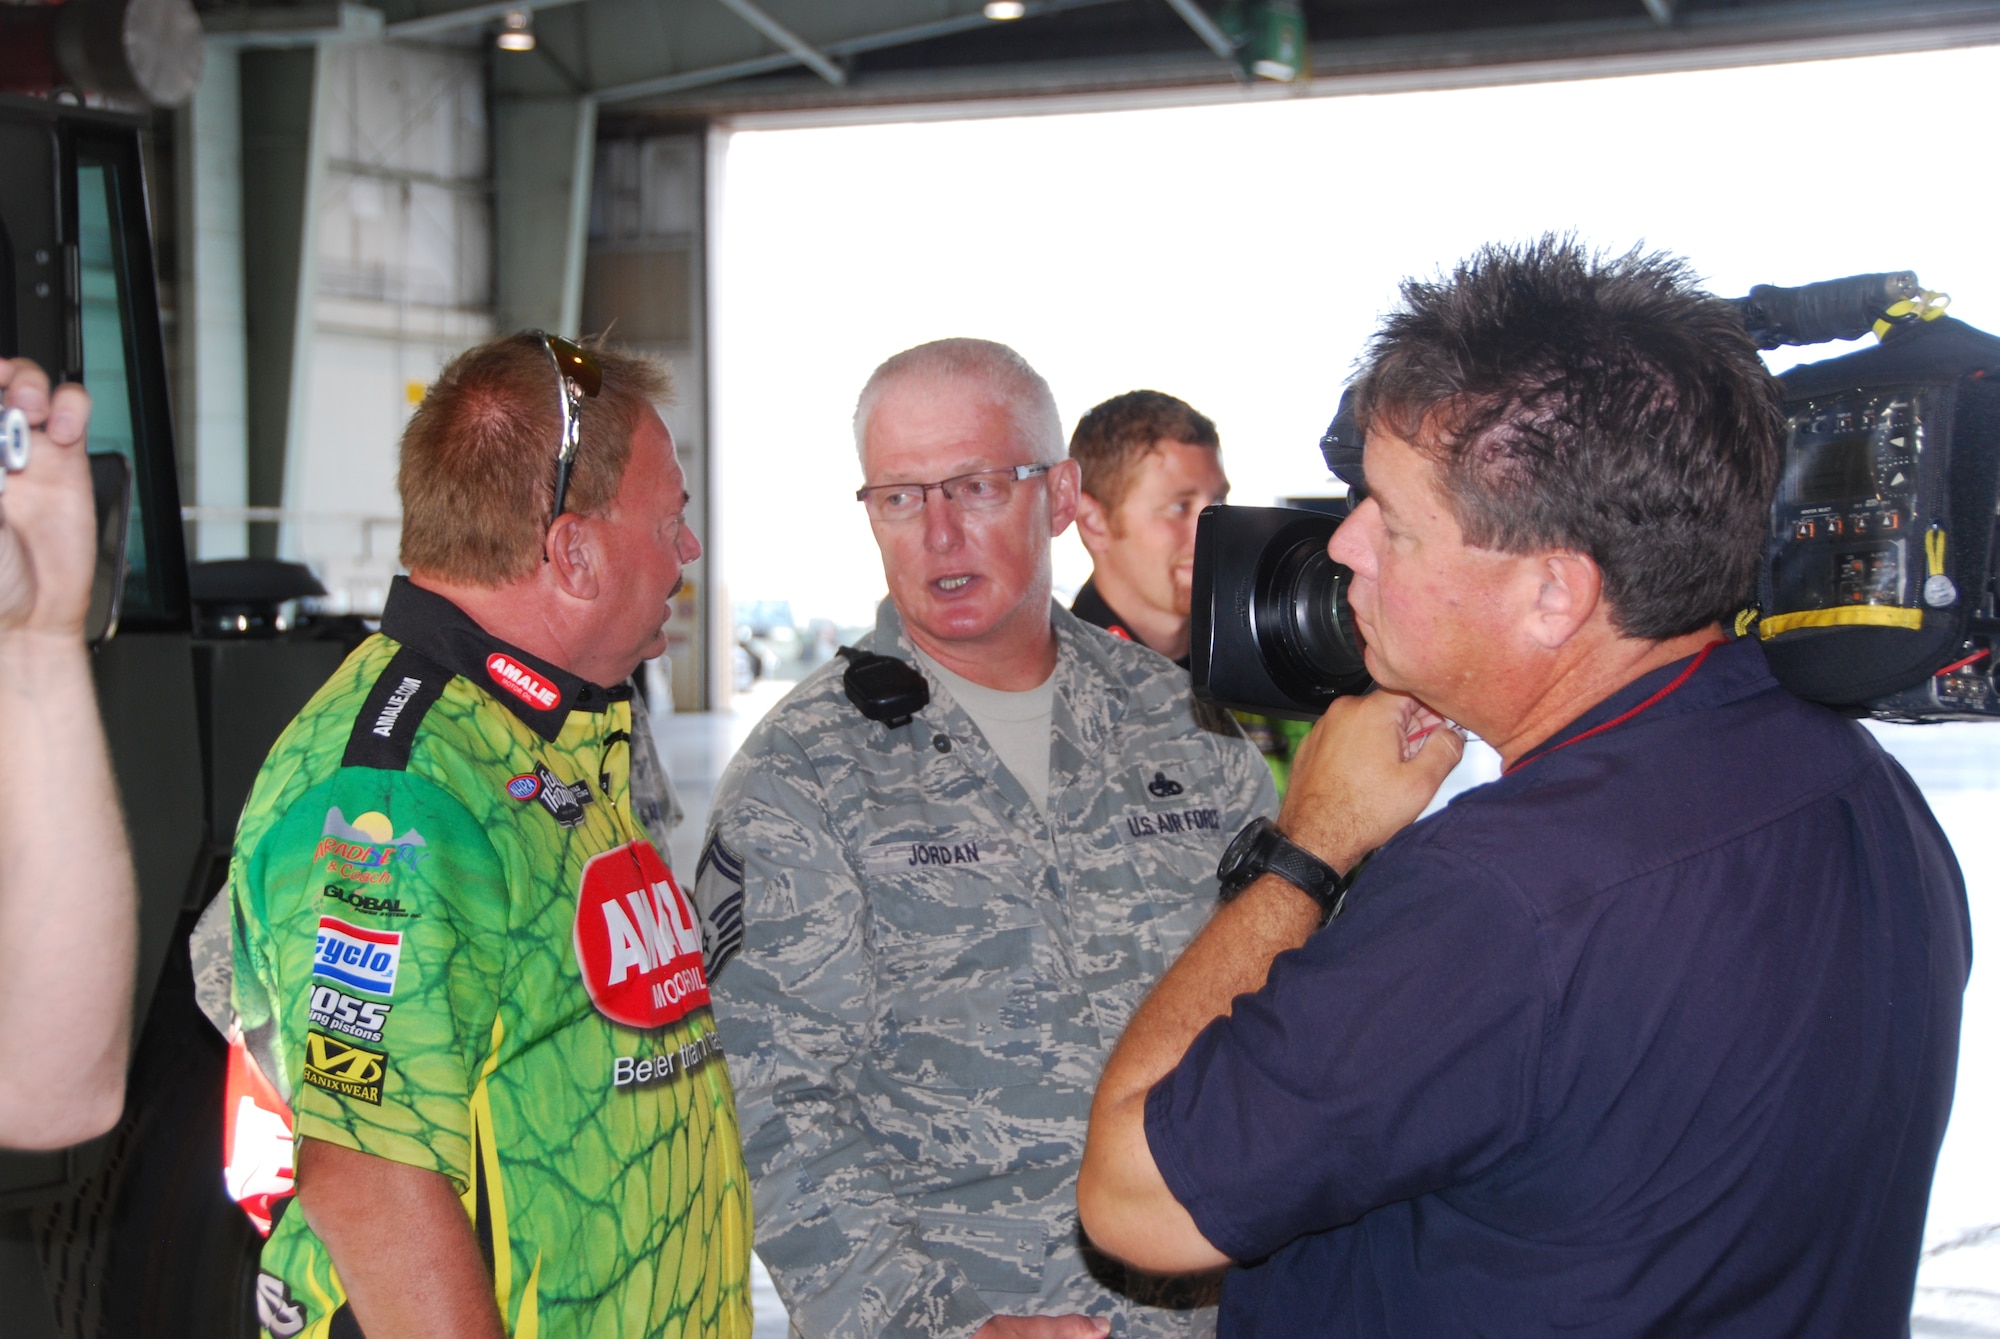 Mr. Matt Ilas, ESPN videographer/producer on-site, gives race attendees and viewers a look into the similarities and differences in maintaining a fighter jet and a Top Fuel dragster.  Senior Master Sgt. Paul Jordan, 301st Maintenance Squadron inspection flight chief, explains the inspection process to Mr. Terry McMillen, driver of the Amalie Oil Top Fuel dragster. McMillen and his crew recently visited the 301st Fighter Wing before racing at a Dallas-area event. ESPN was on hand to record the visit between the two “high horsepower” professions. (Air Force Photo/Tech. Sgt. Shawn McCowan)